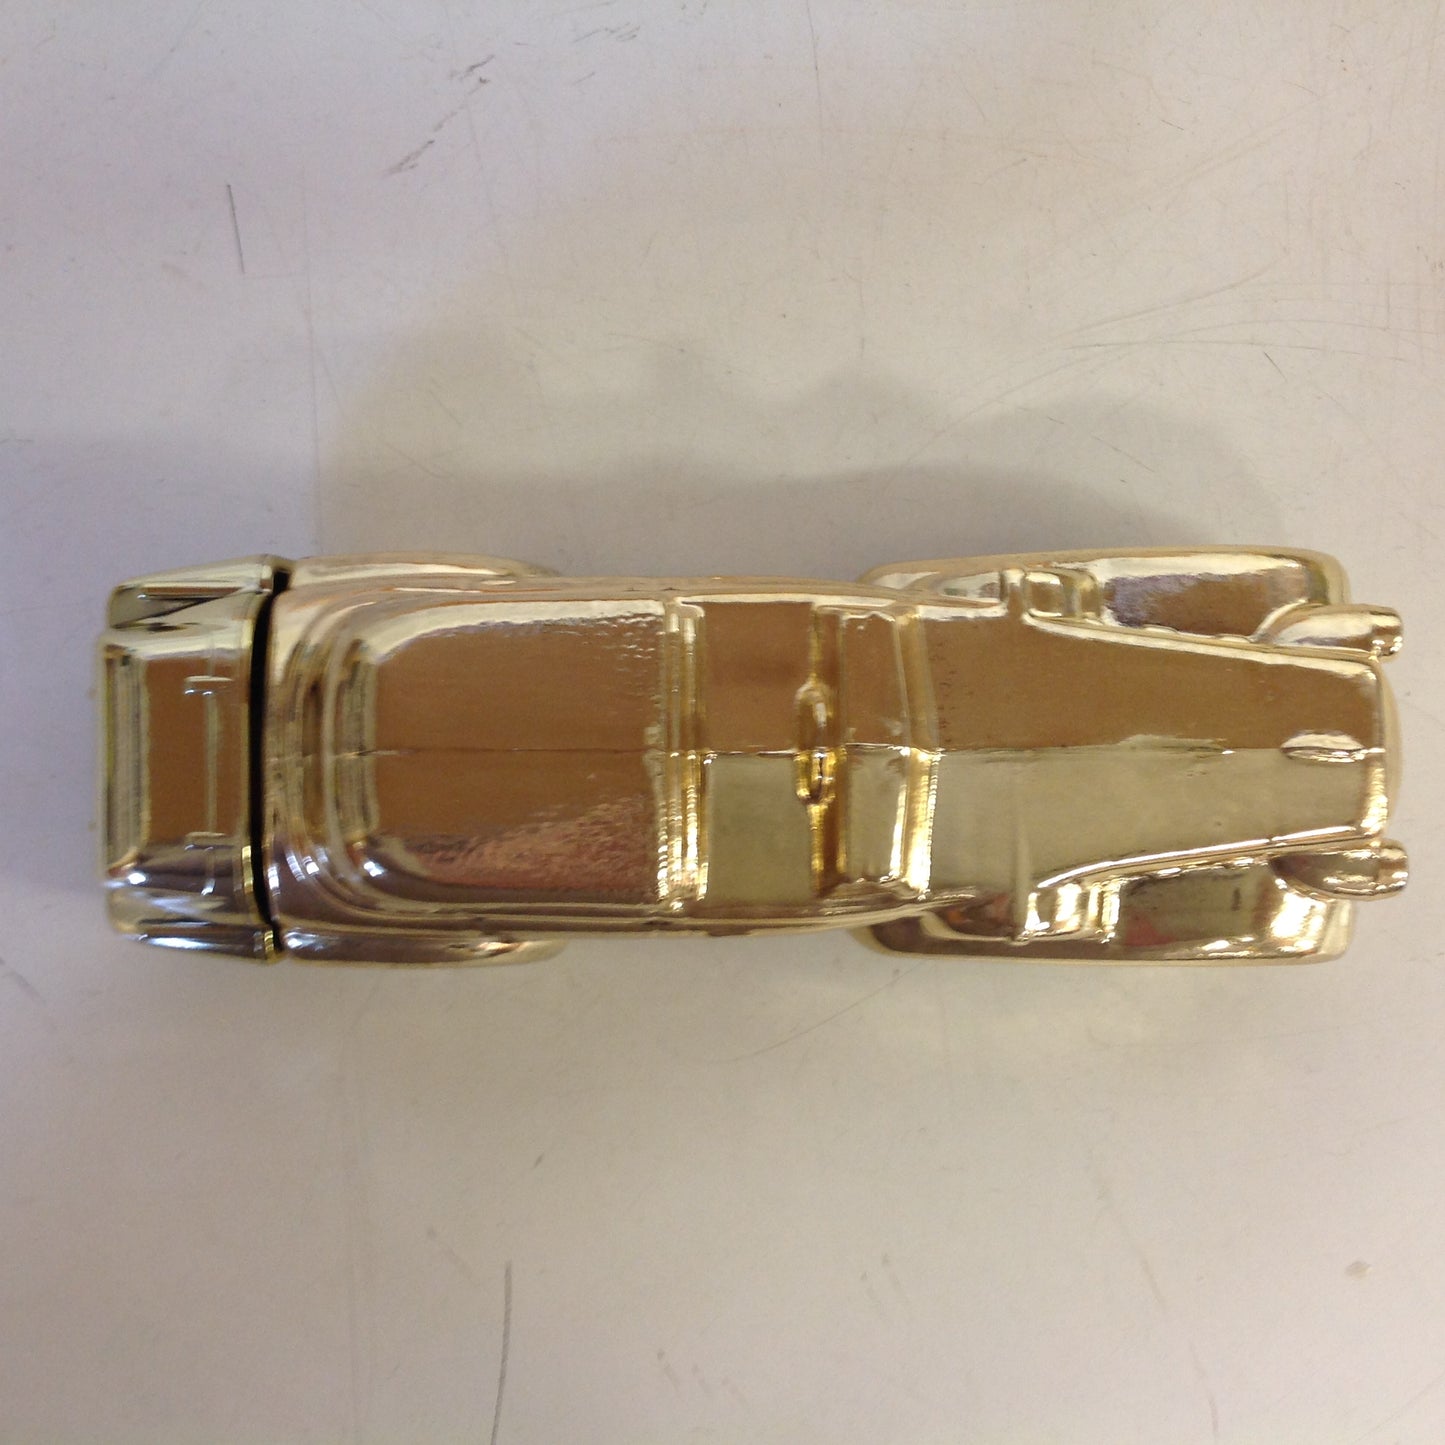 Vintage 1970's AVON Solid Gold Cadillac Excalibur After Shave Unopened with Original Box